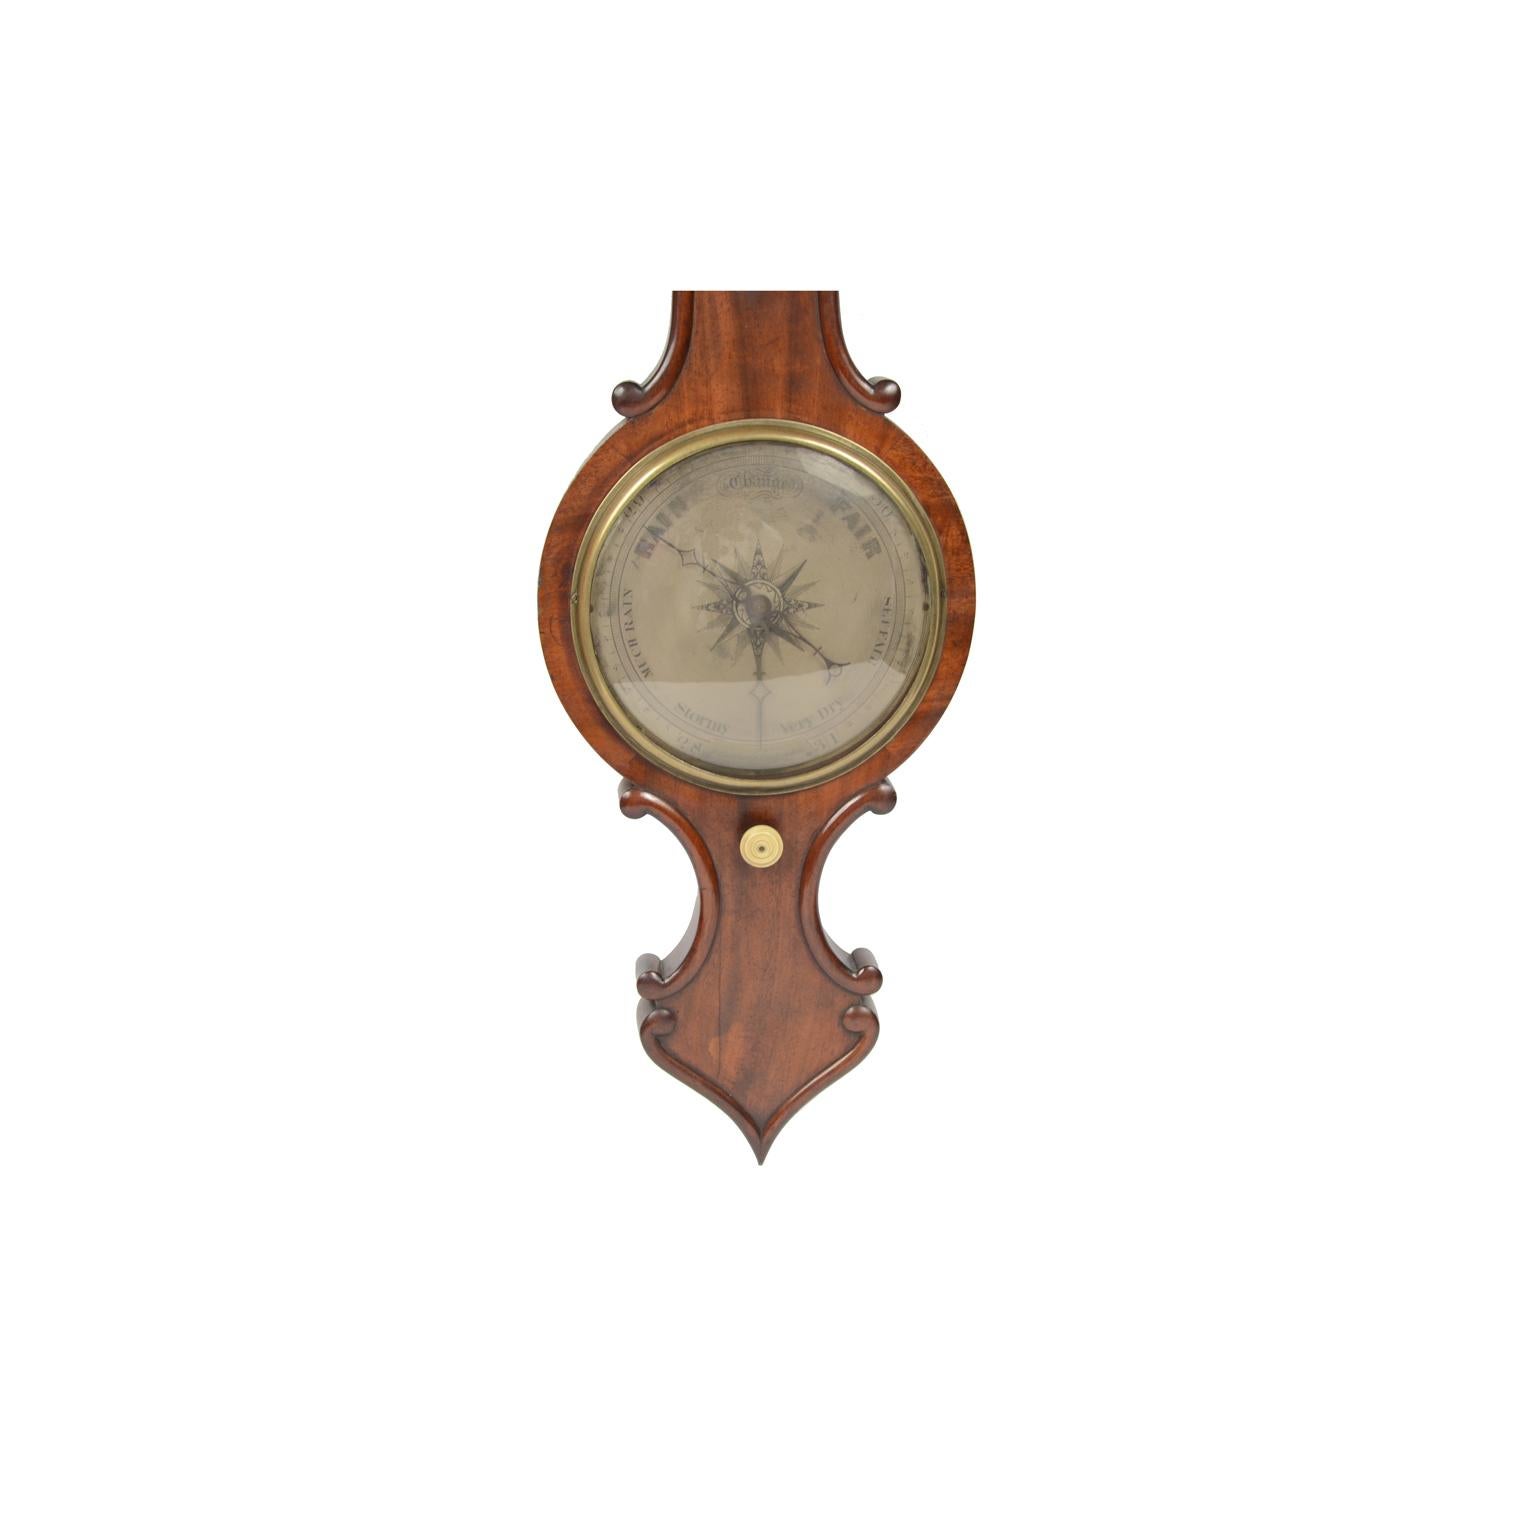 English barometer with thermometer signed P. Guarnerio Huntingdon 1840. Mounted on a wooden plank elegantly carved. Very good condition and in order. Measures: Height 101 cm.